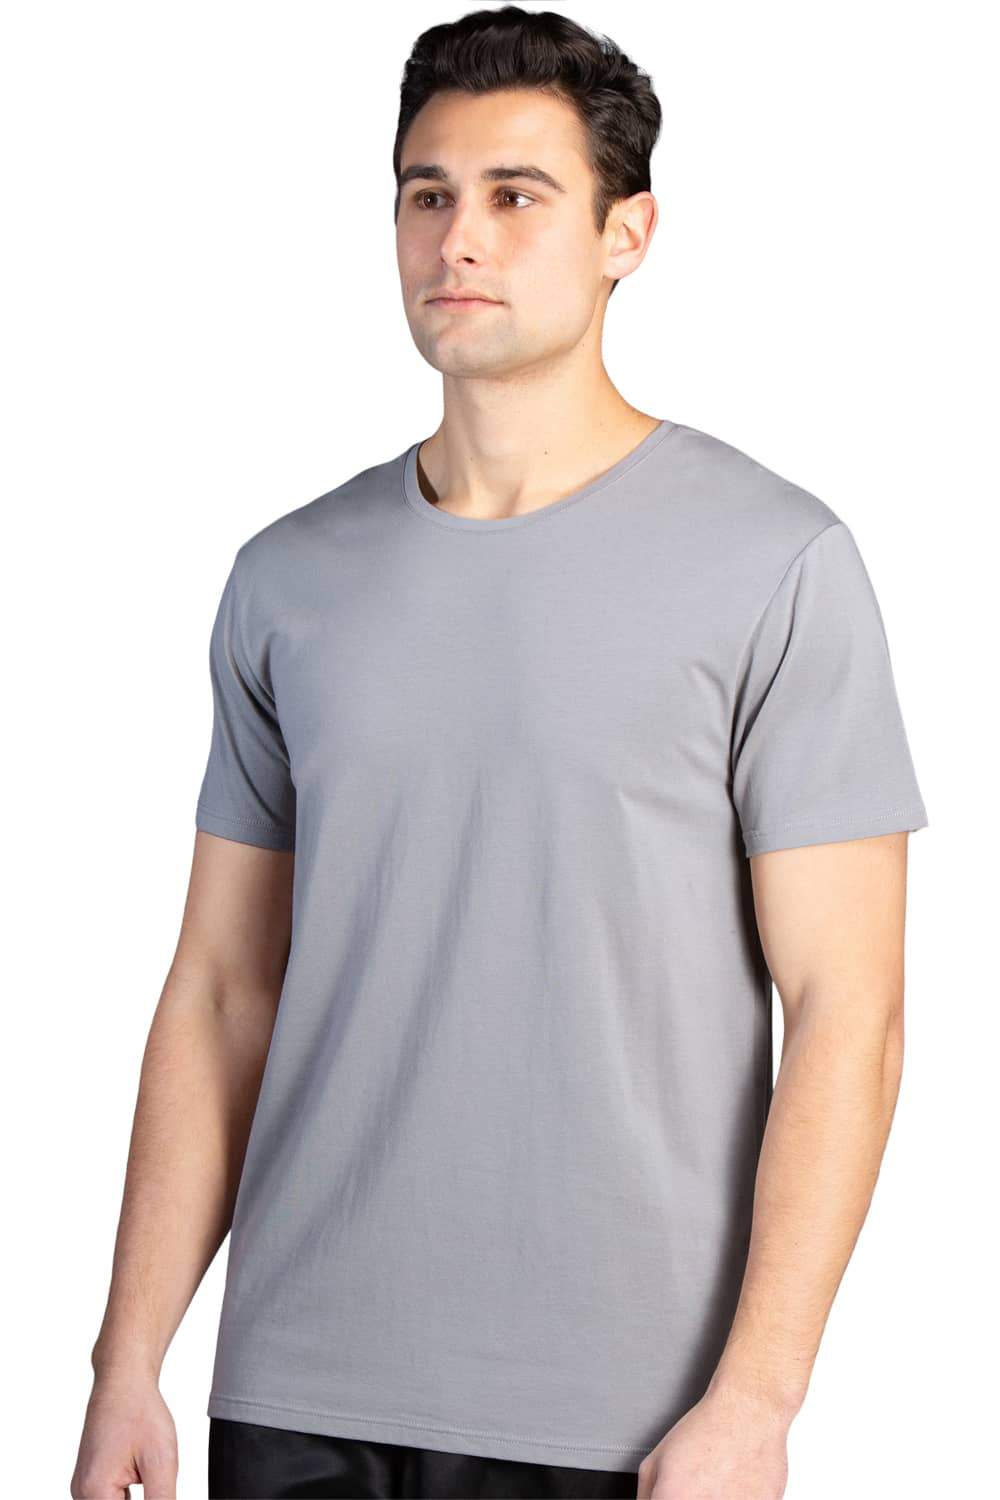 Men's Classic Fit Soft Stretch Crew Neck Undershirt Mens>Casual>Tops Fishers Finery Sky Gray Small Single Pack